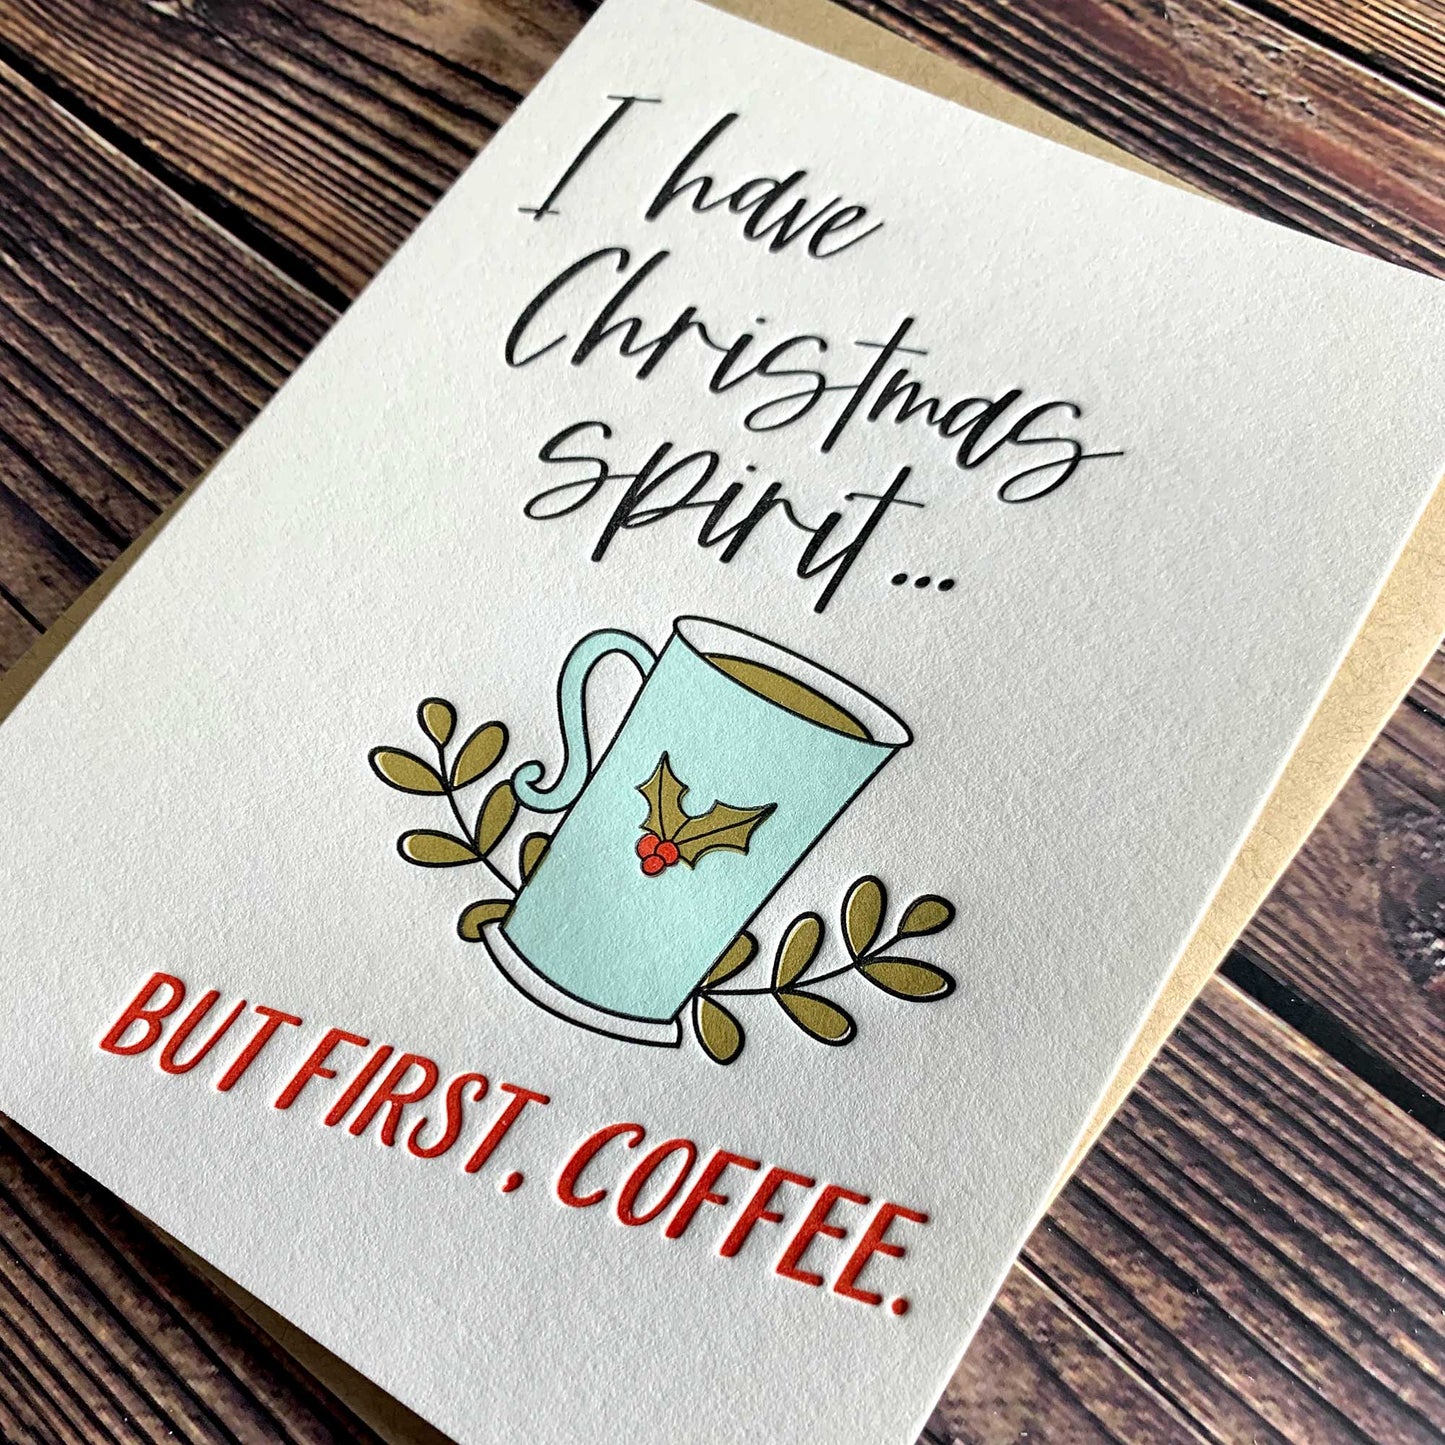 I have Christmas Spirit, but first, coffee, Warm Wishes. Christmas Greeting Card, Letterpress printed, view shows letterpress impression, includes envelope